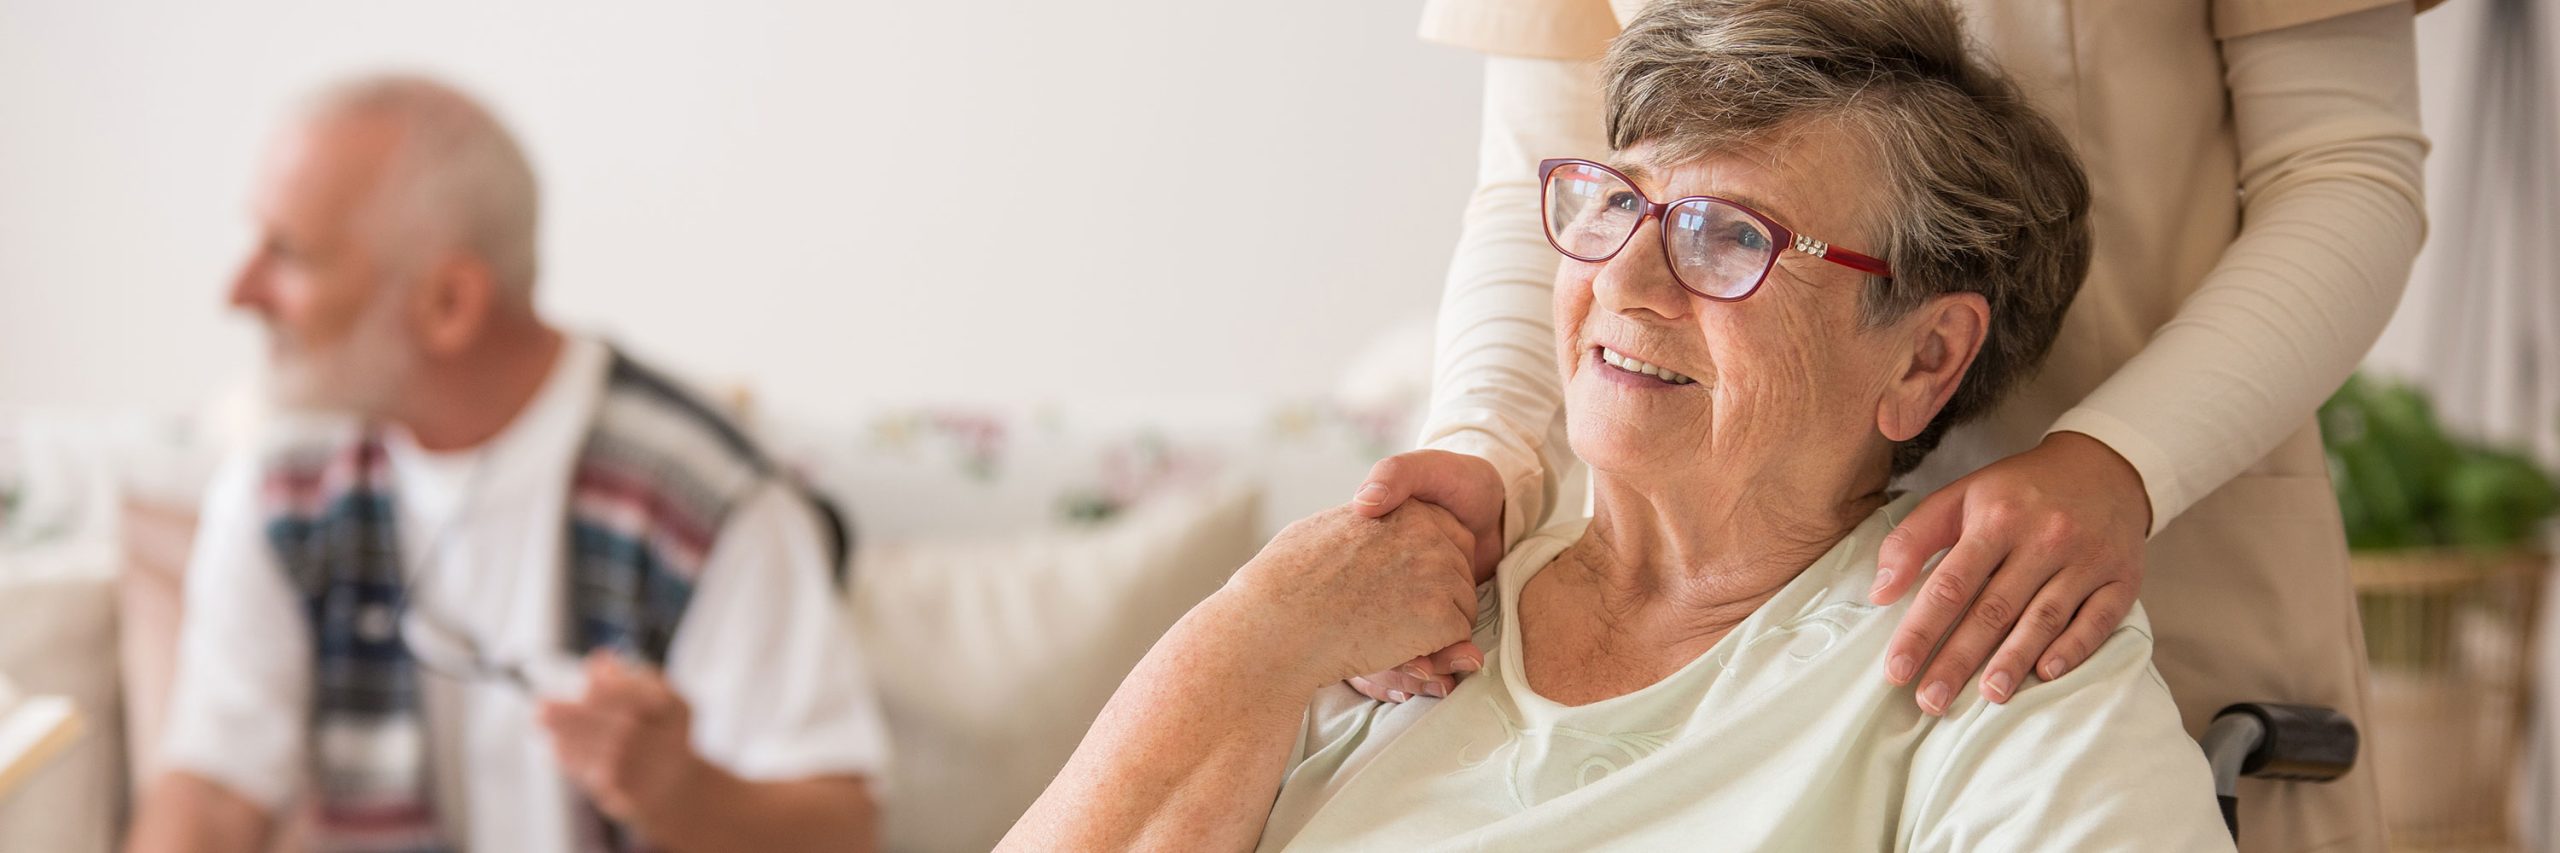 Everything you need to know about aged care in Australia